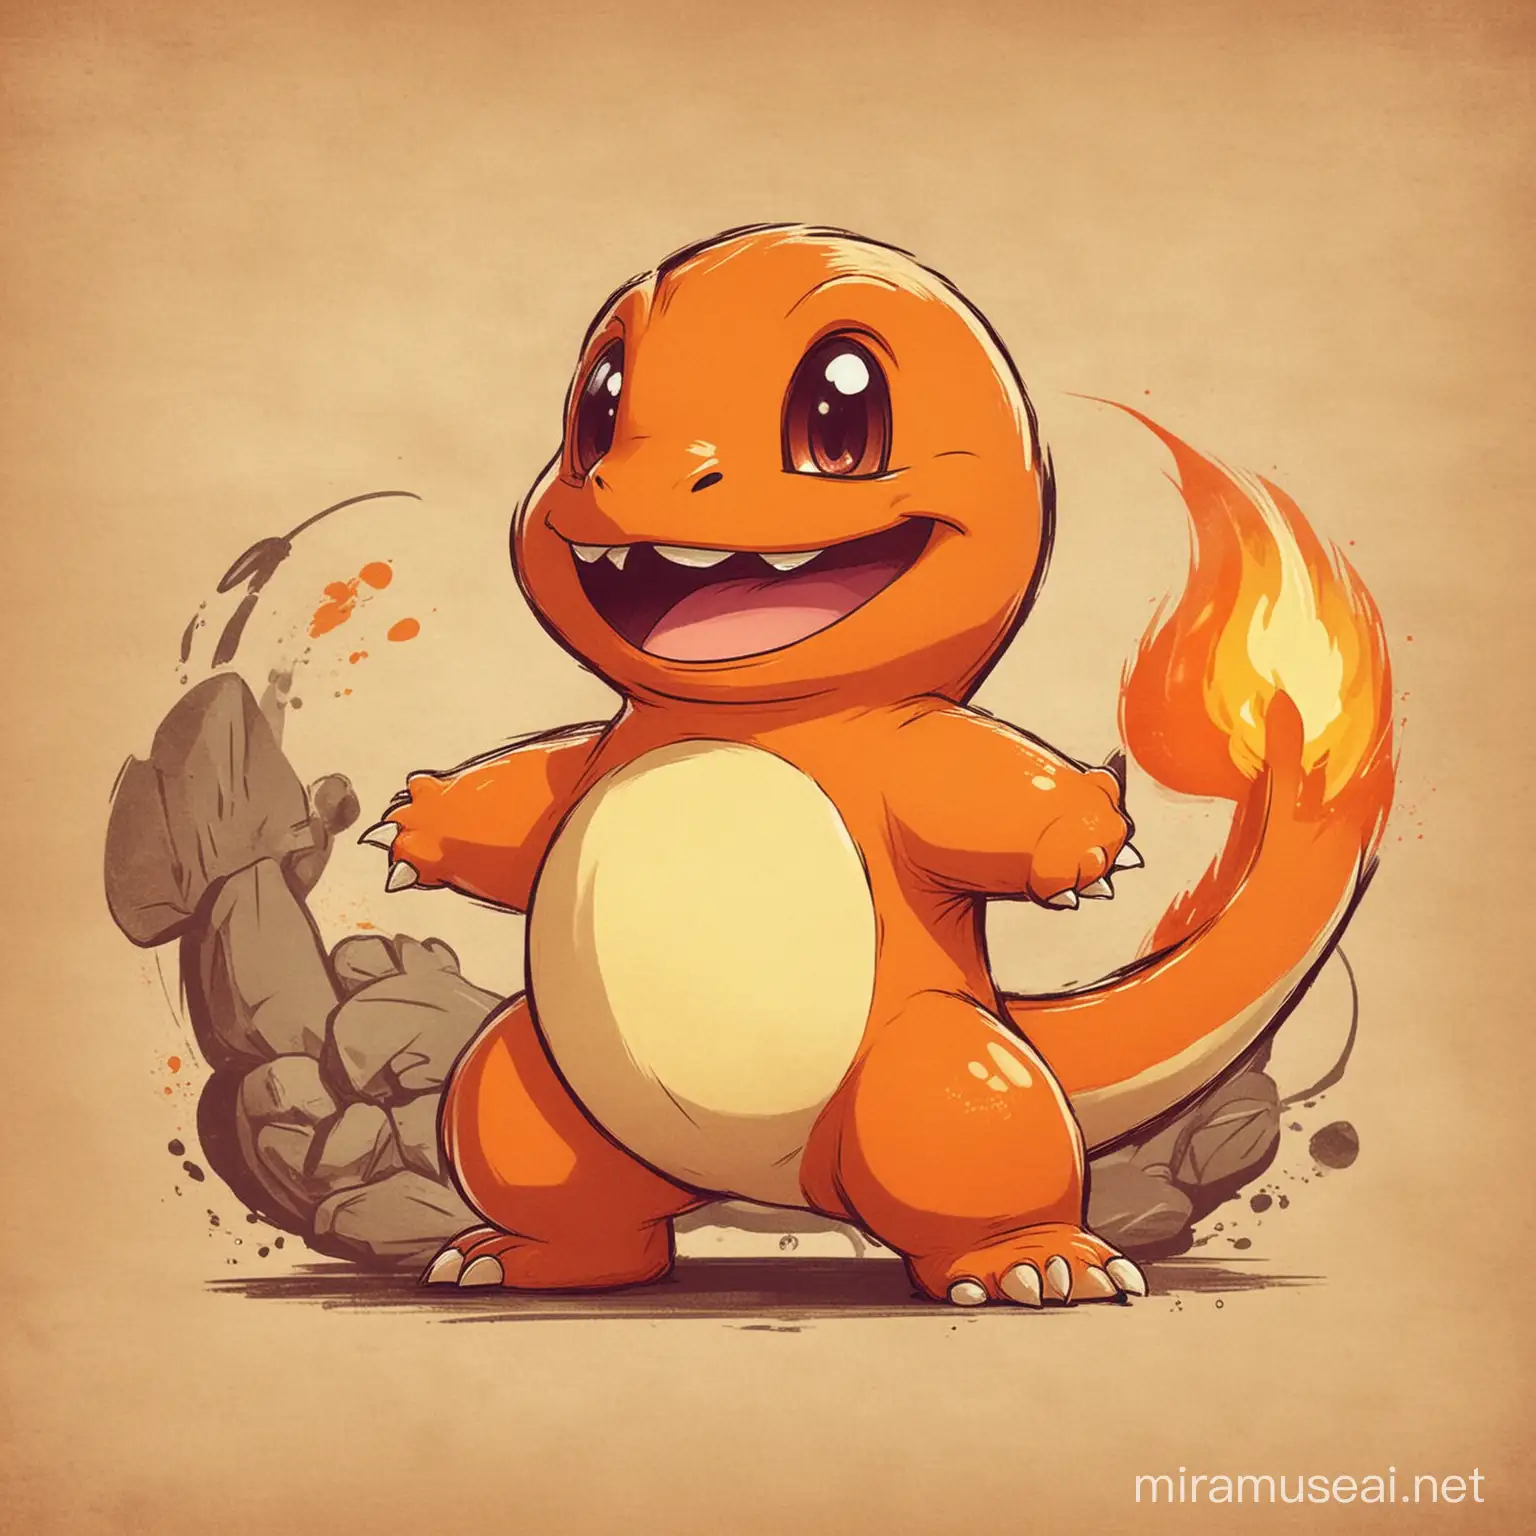 charmander in the style of vintage cartoons